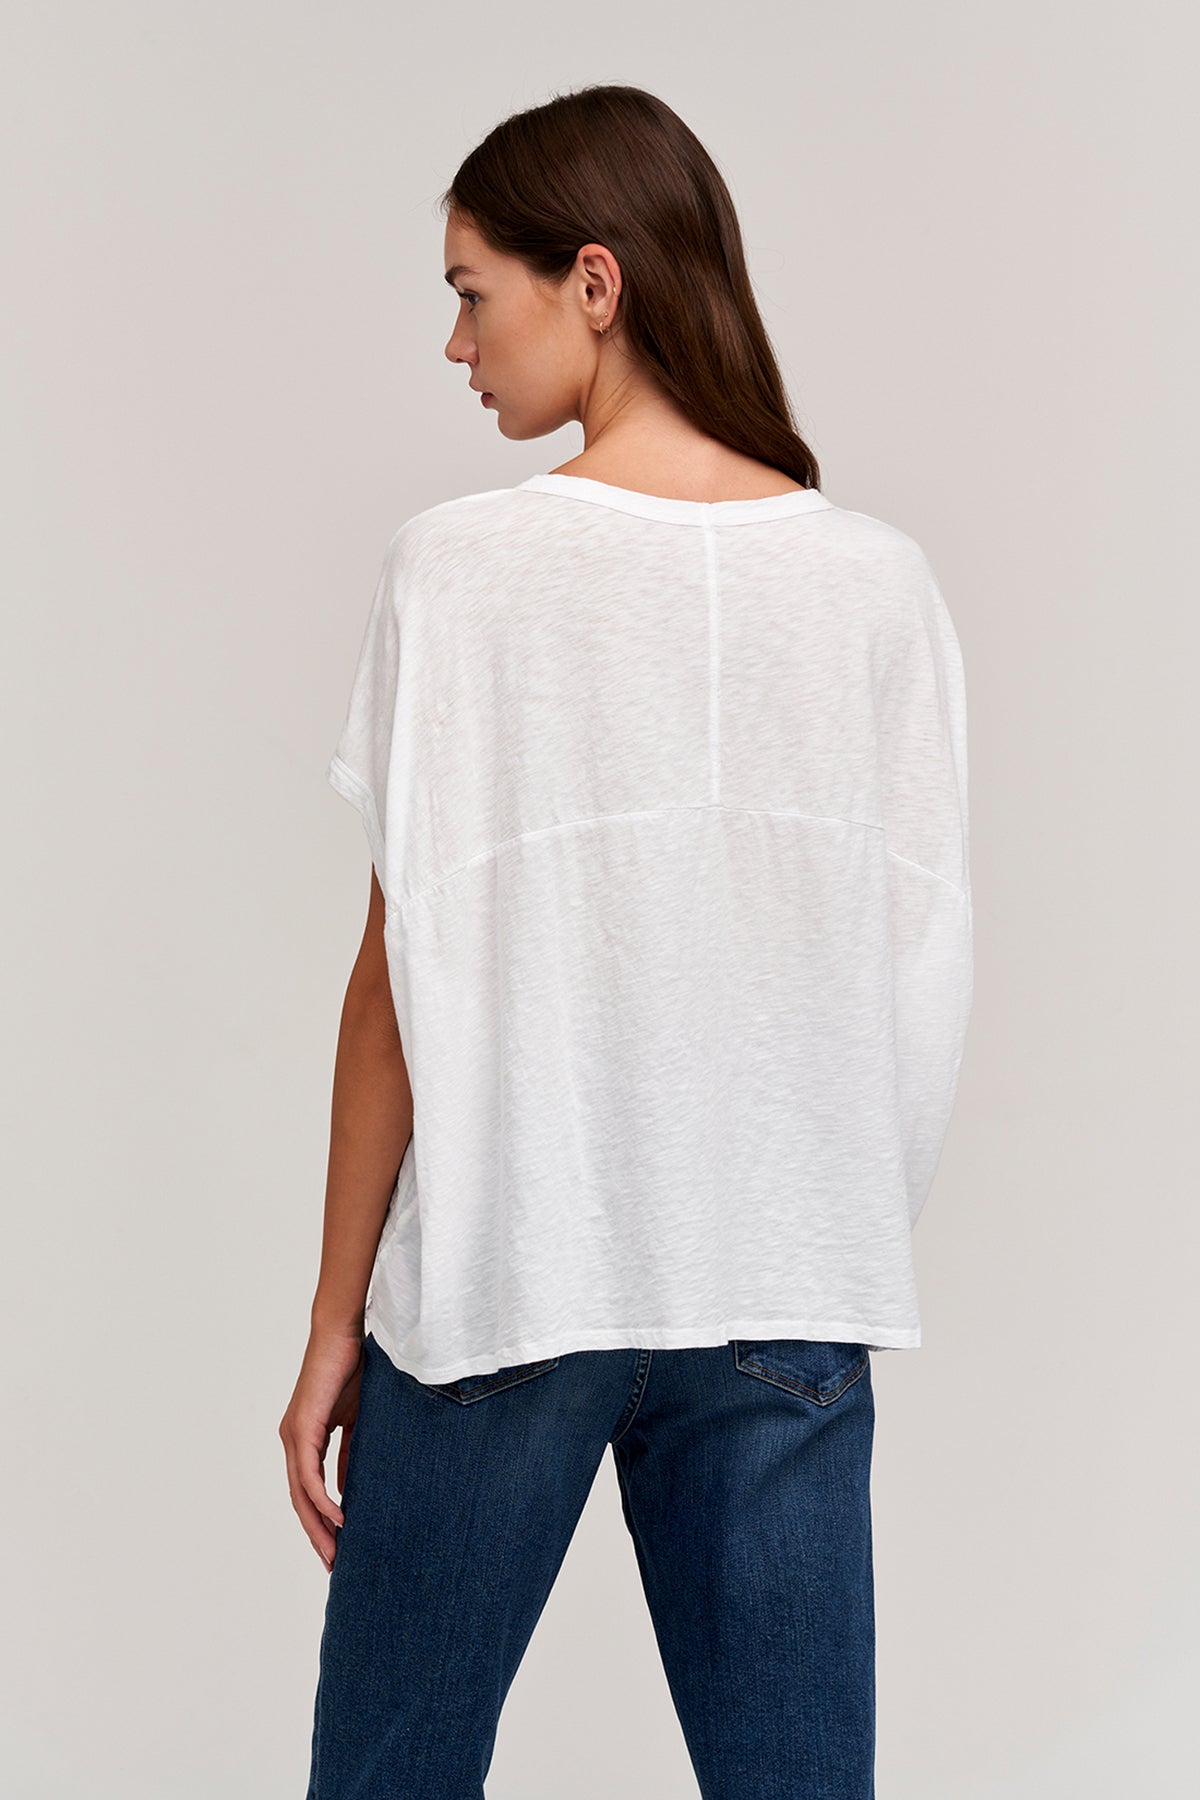 The back view of a woman wearing the Velvet by Graham & Spencer CORA BOXY TEE top and jeans.-26317150191809